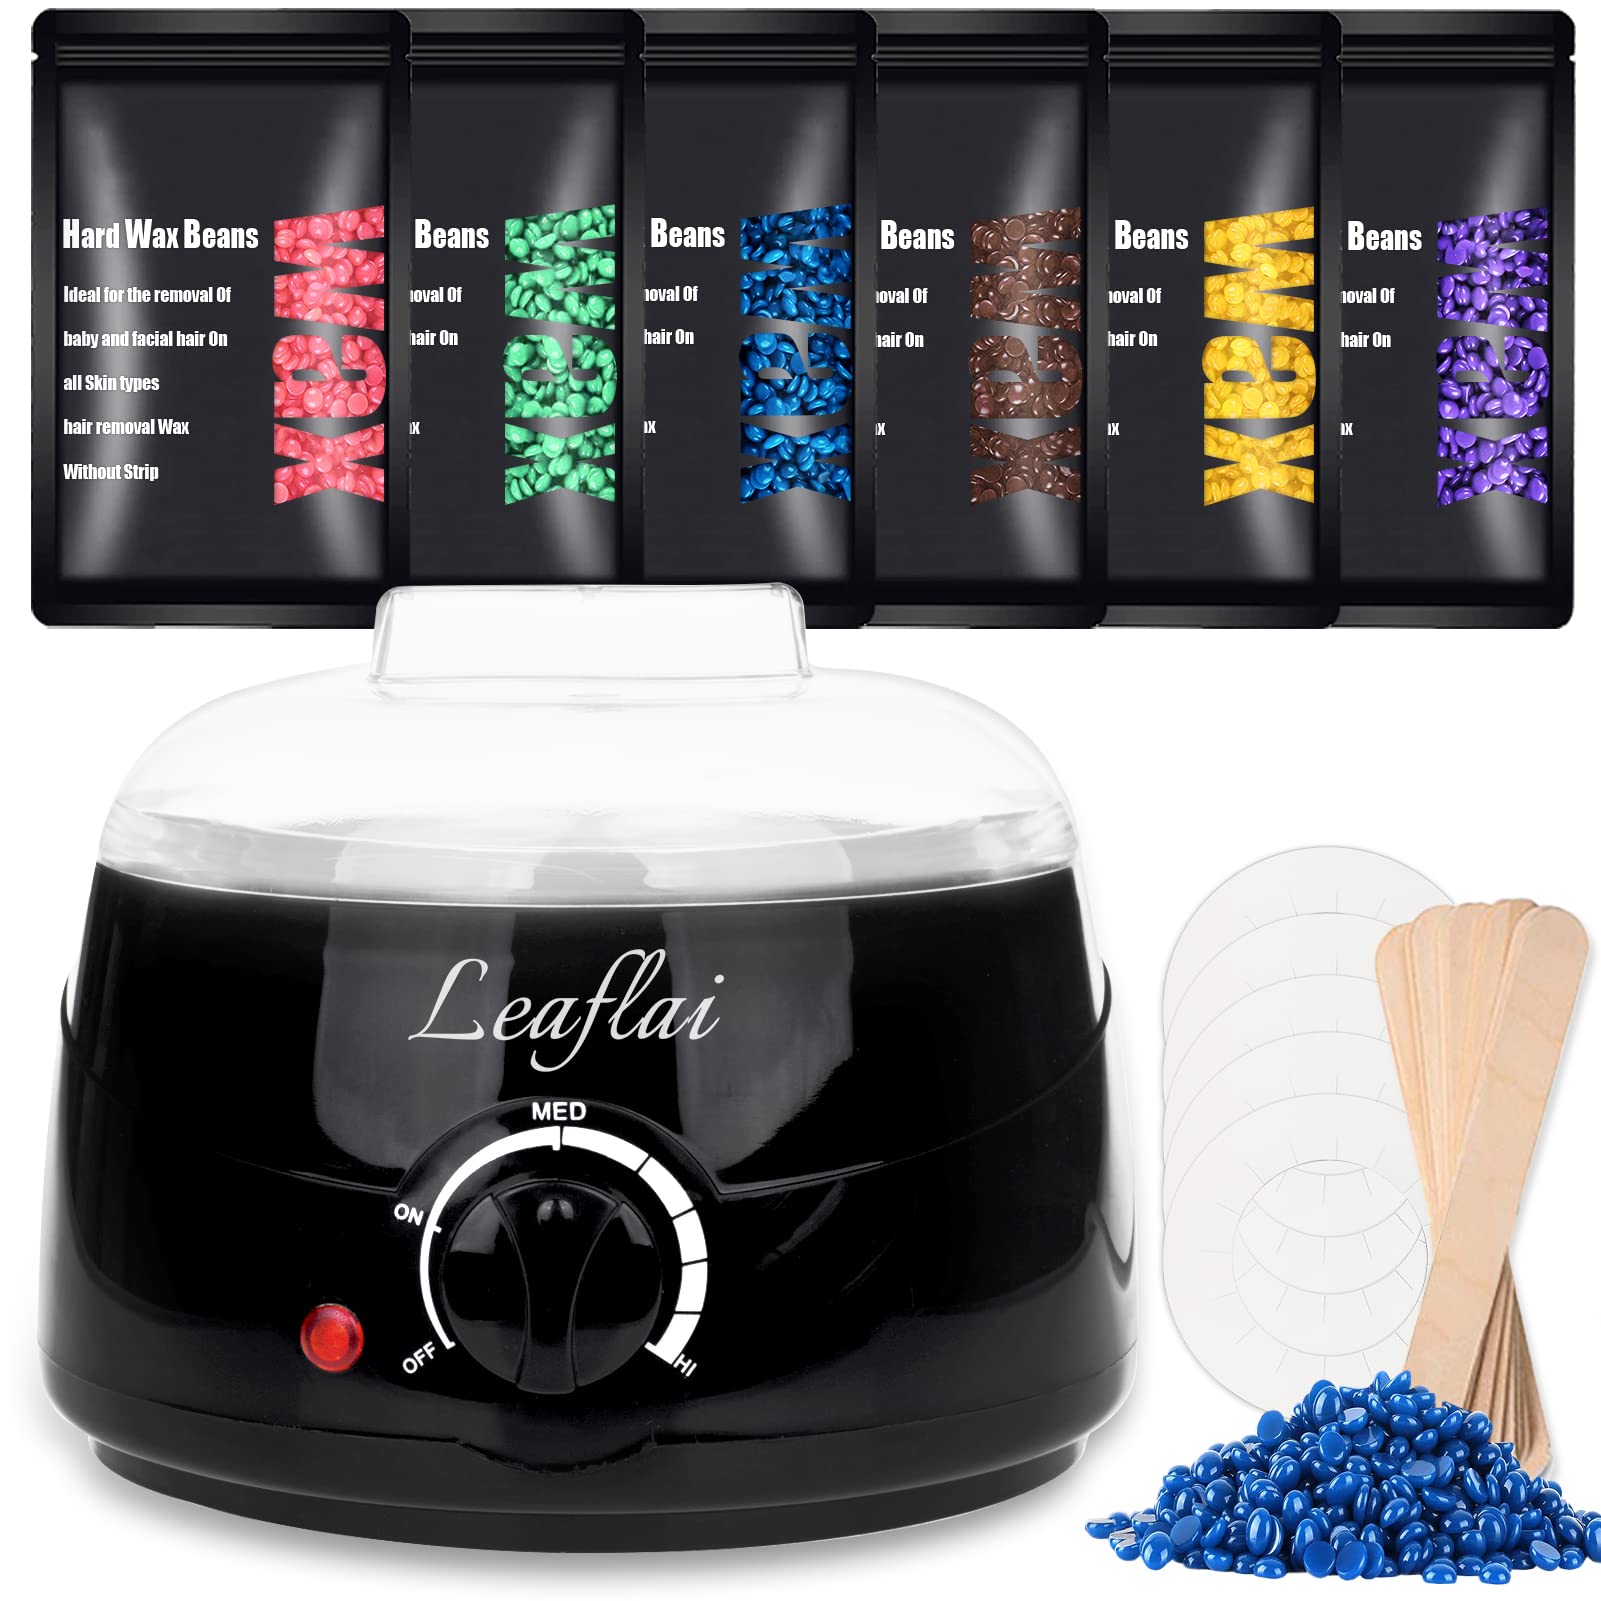 Waxing Kit,Wax Warmer for Hair Removal ,Professional Wax Heater with 600g  Hard Wax Beads 10